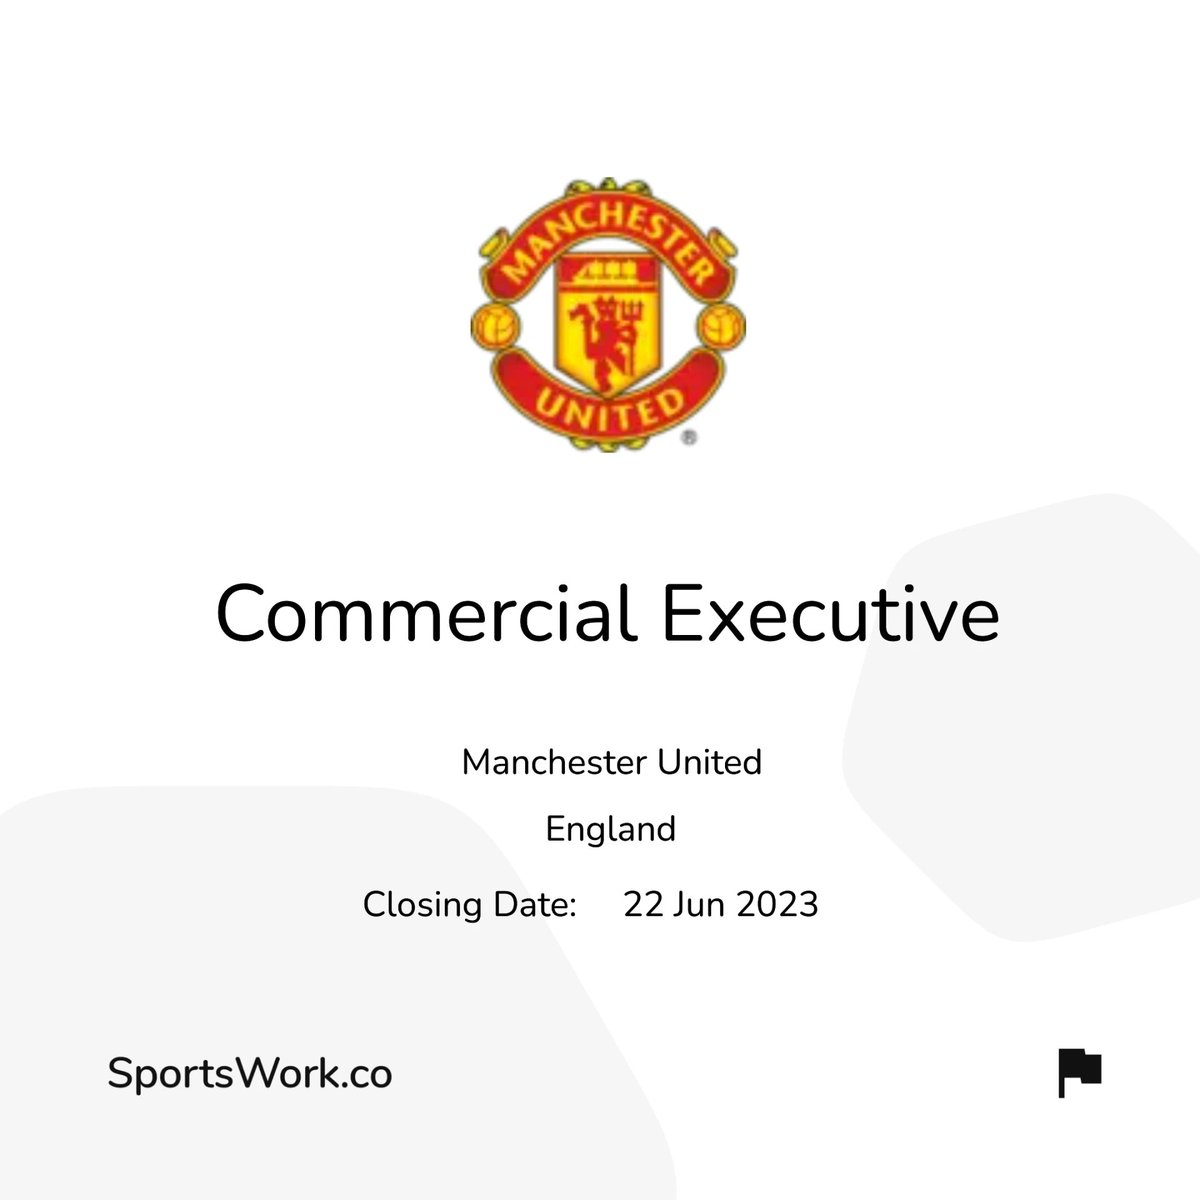 ⭐️  New Vacancy

⚽  Manchester United

💰 Commercial Executive

📍  England

More information can be found here - sportswork.co/jobs/mancheste…

#sportswork #sportsjobs #workinsport #England #manutd